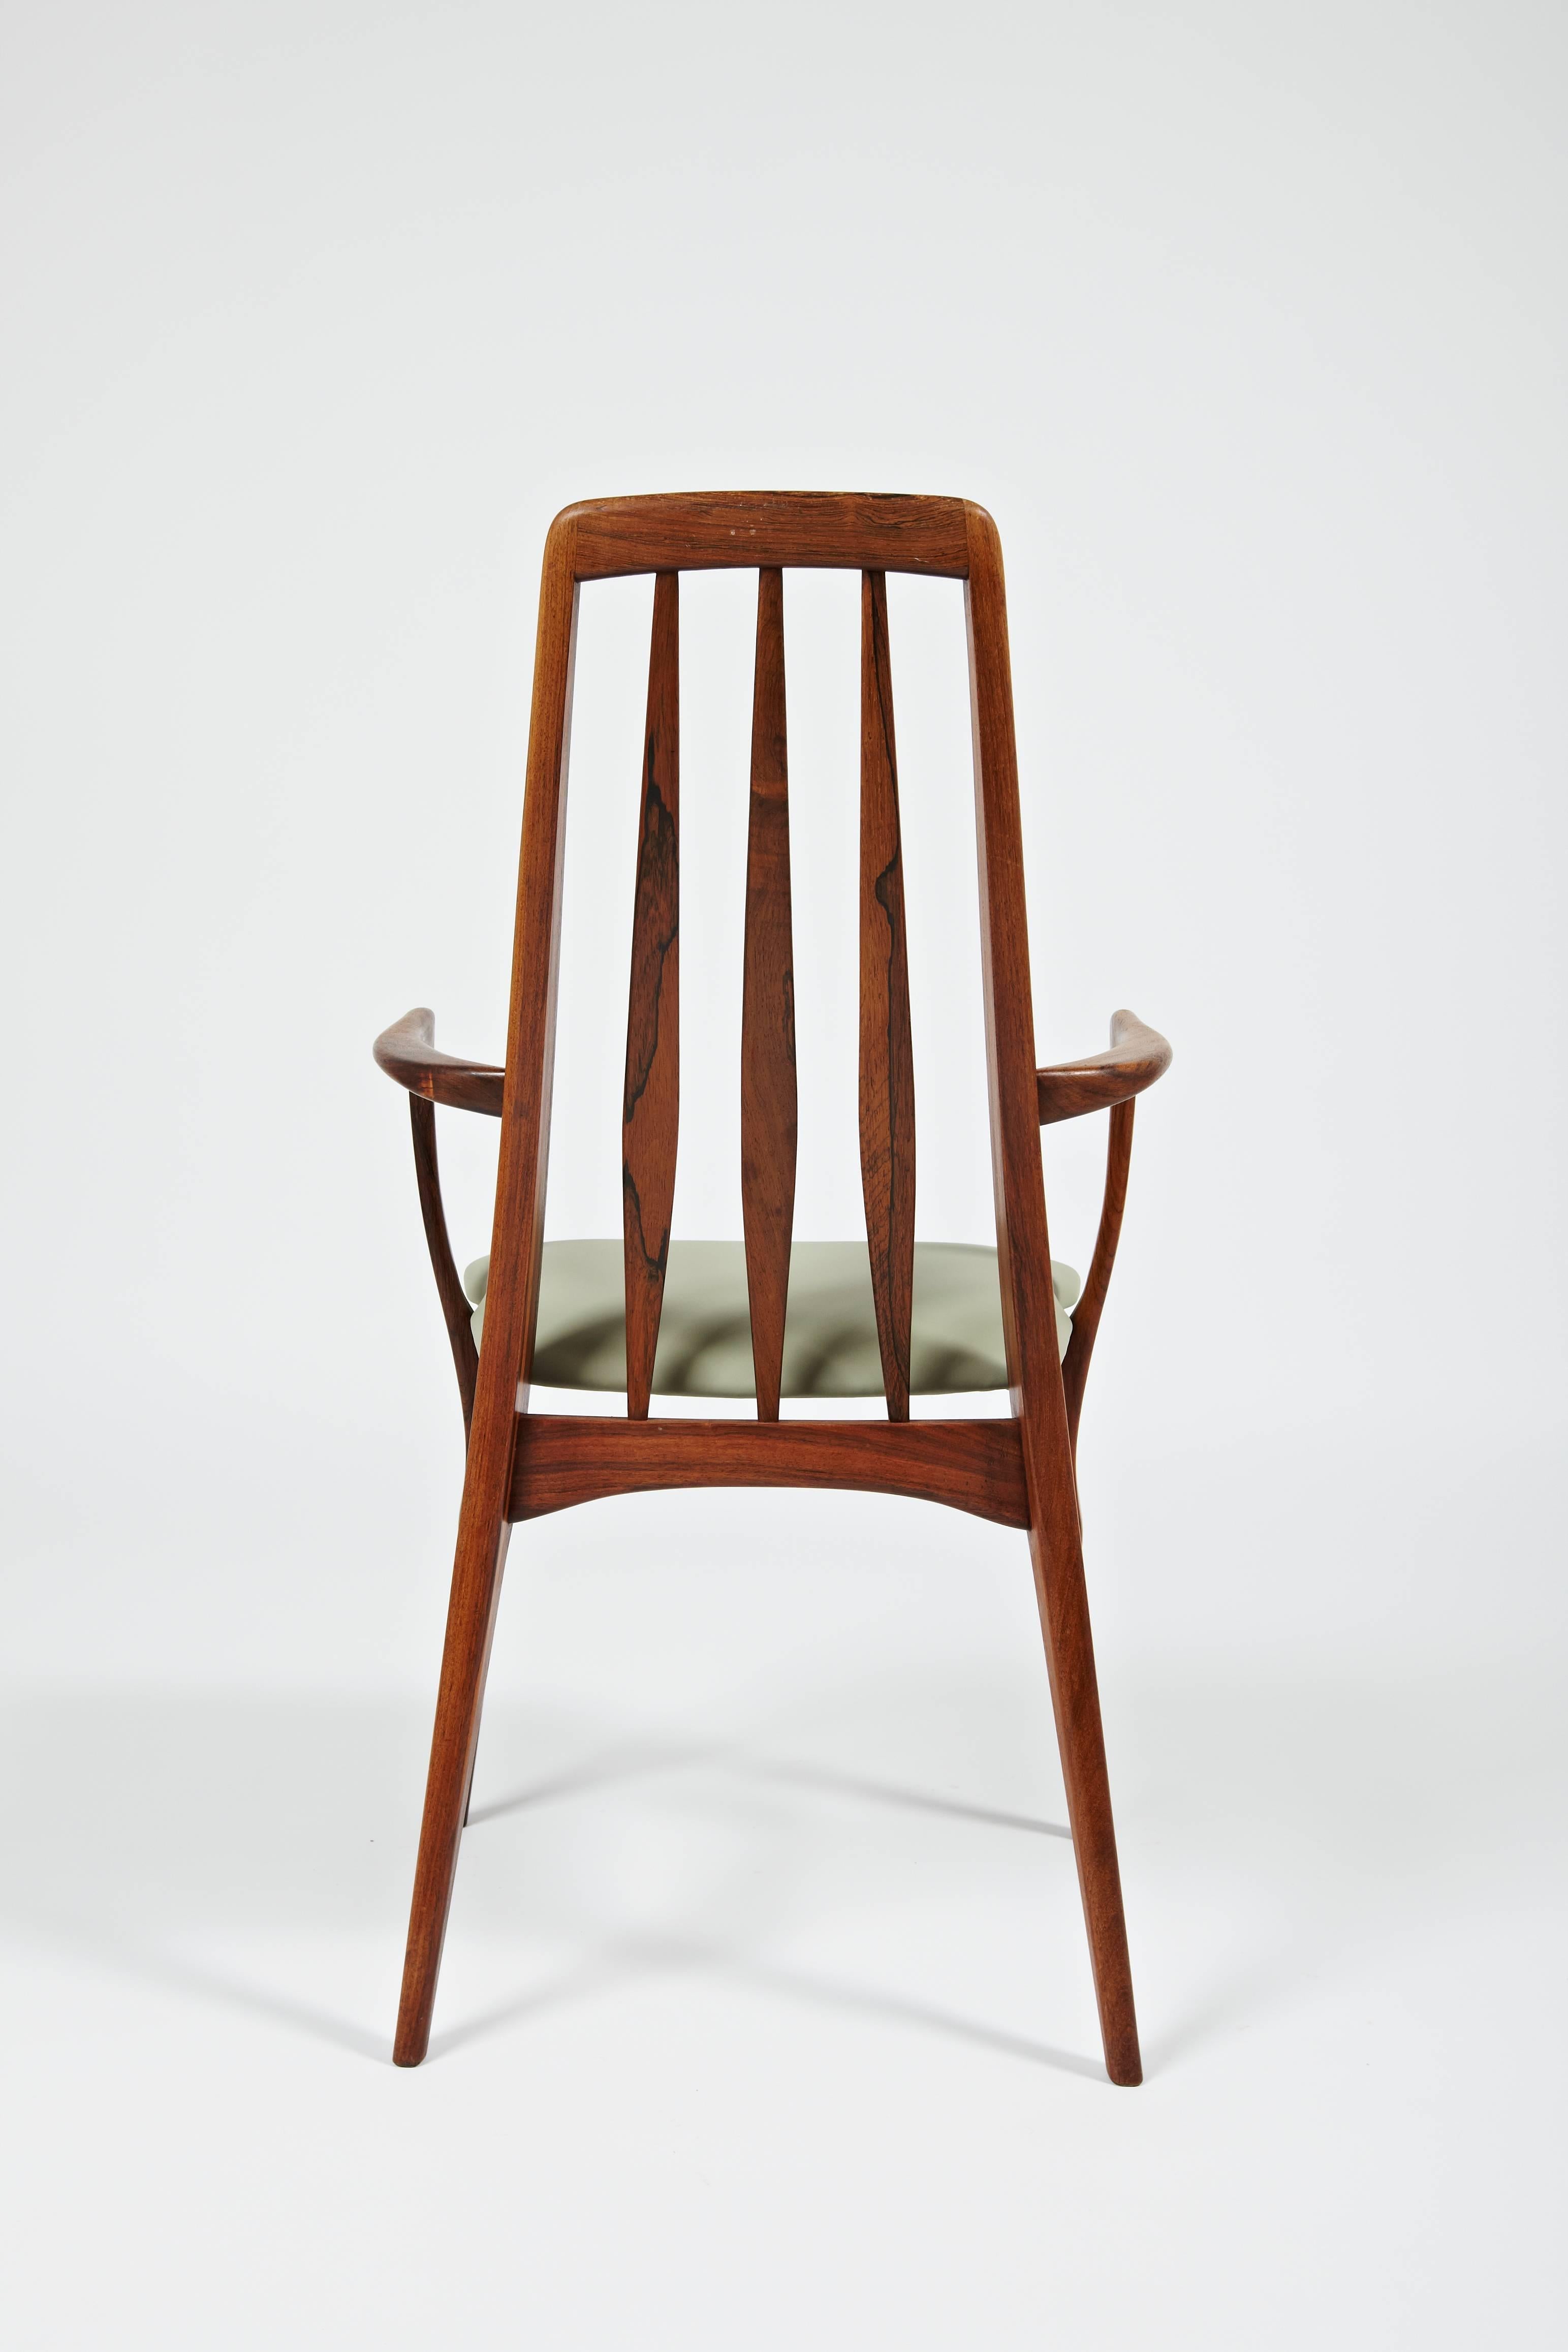 Niels Kofoed Rosewood Dining Chair with Arms, circa 1964 For Sale 4